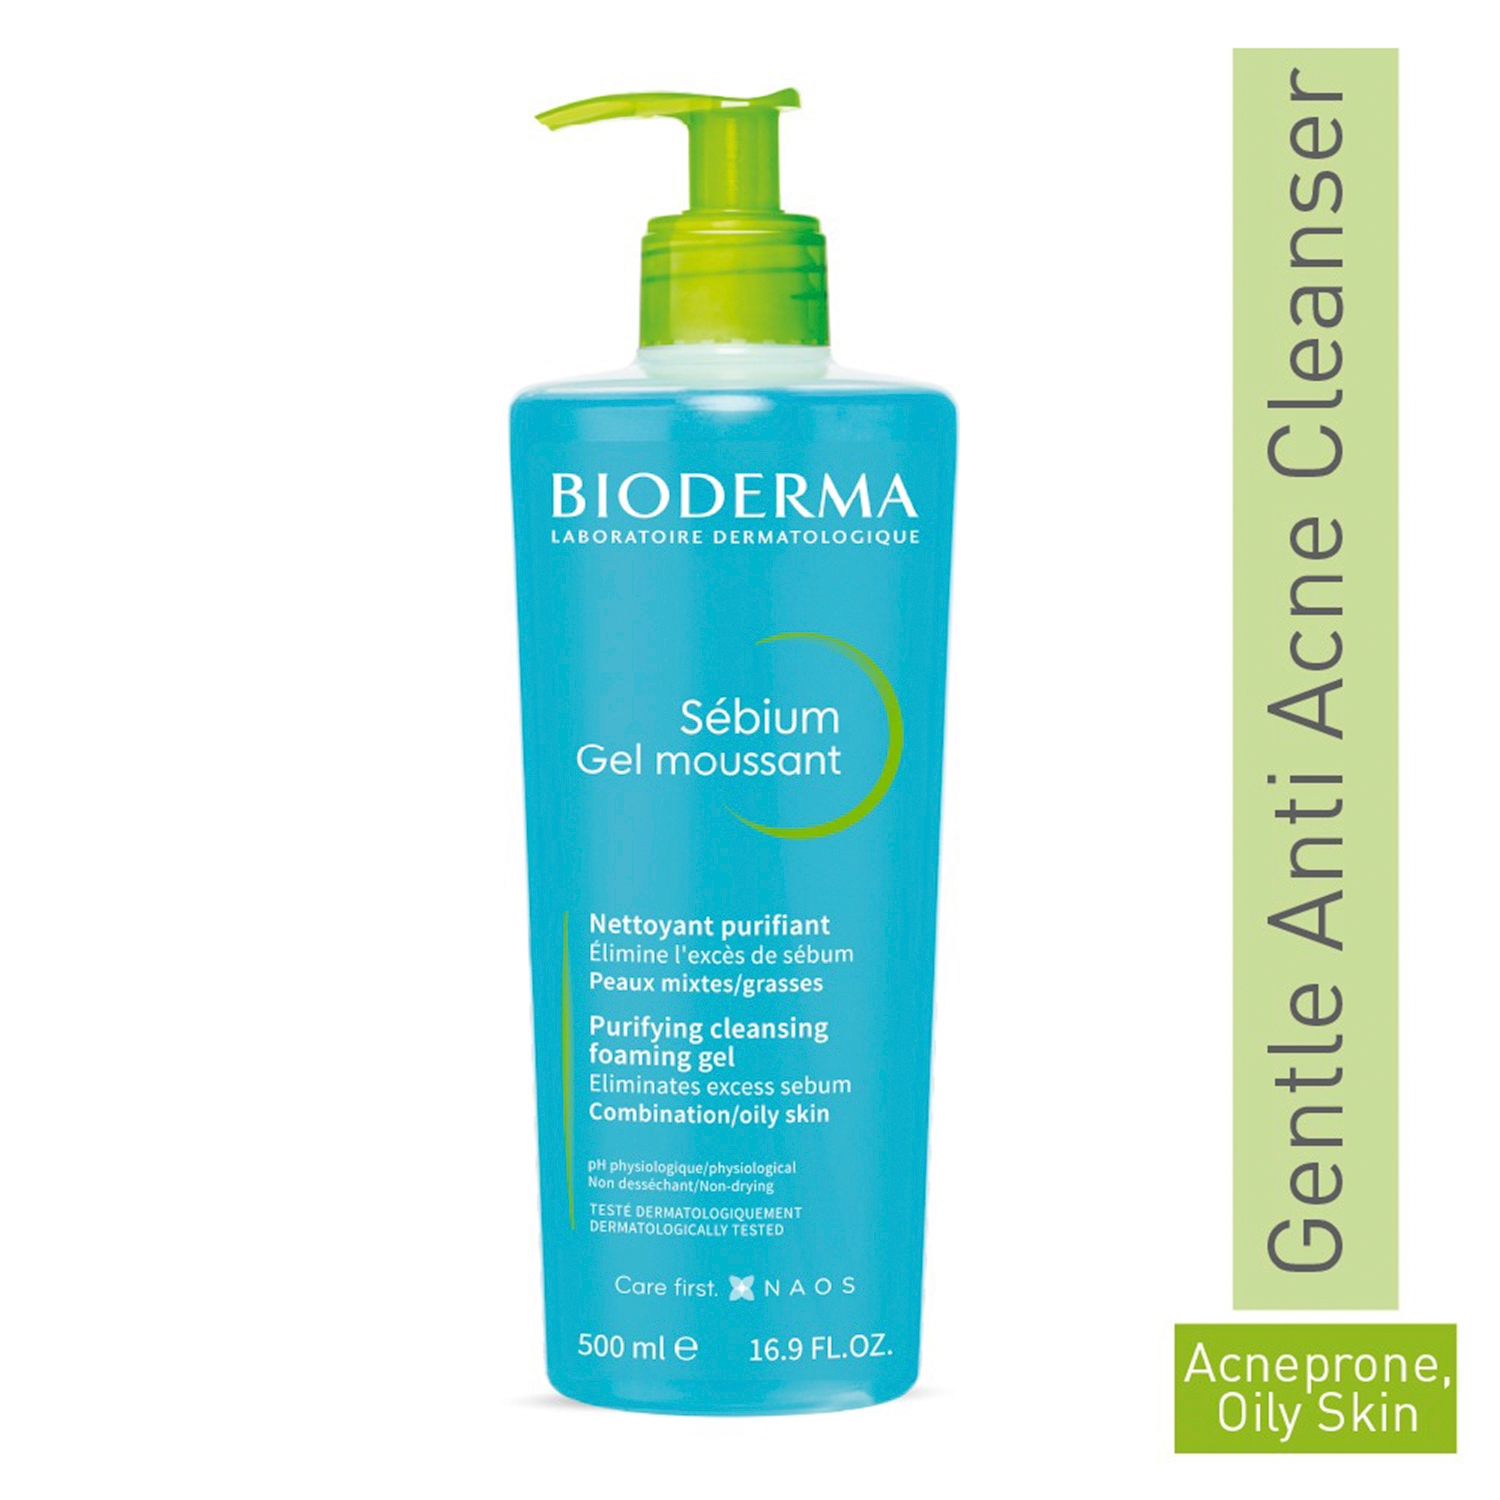 Bioderma | Bioderma Sebium Face And Body Wash Moussant Purifying Cleansing Gel (500ml)